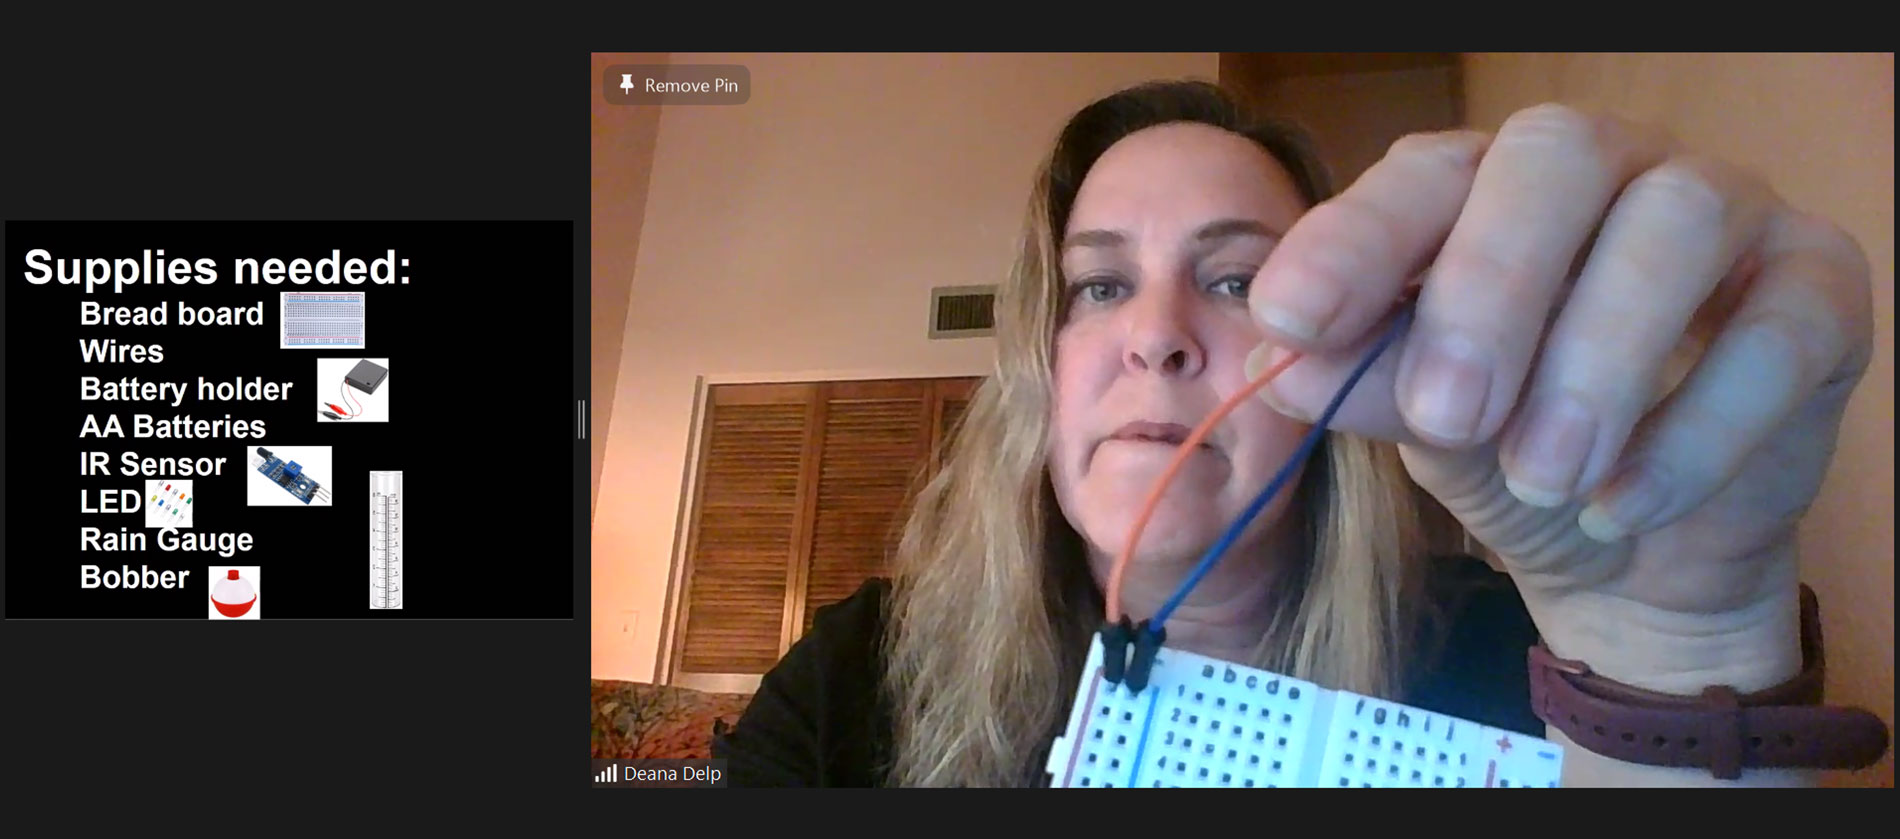 A Zoom screenshot in which Lecturer Deana Delp is holding a bread board and wires and includes a list of supplies needed for a smart rain gauge activity.